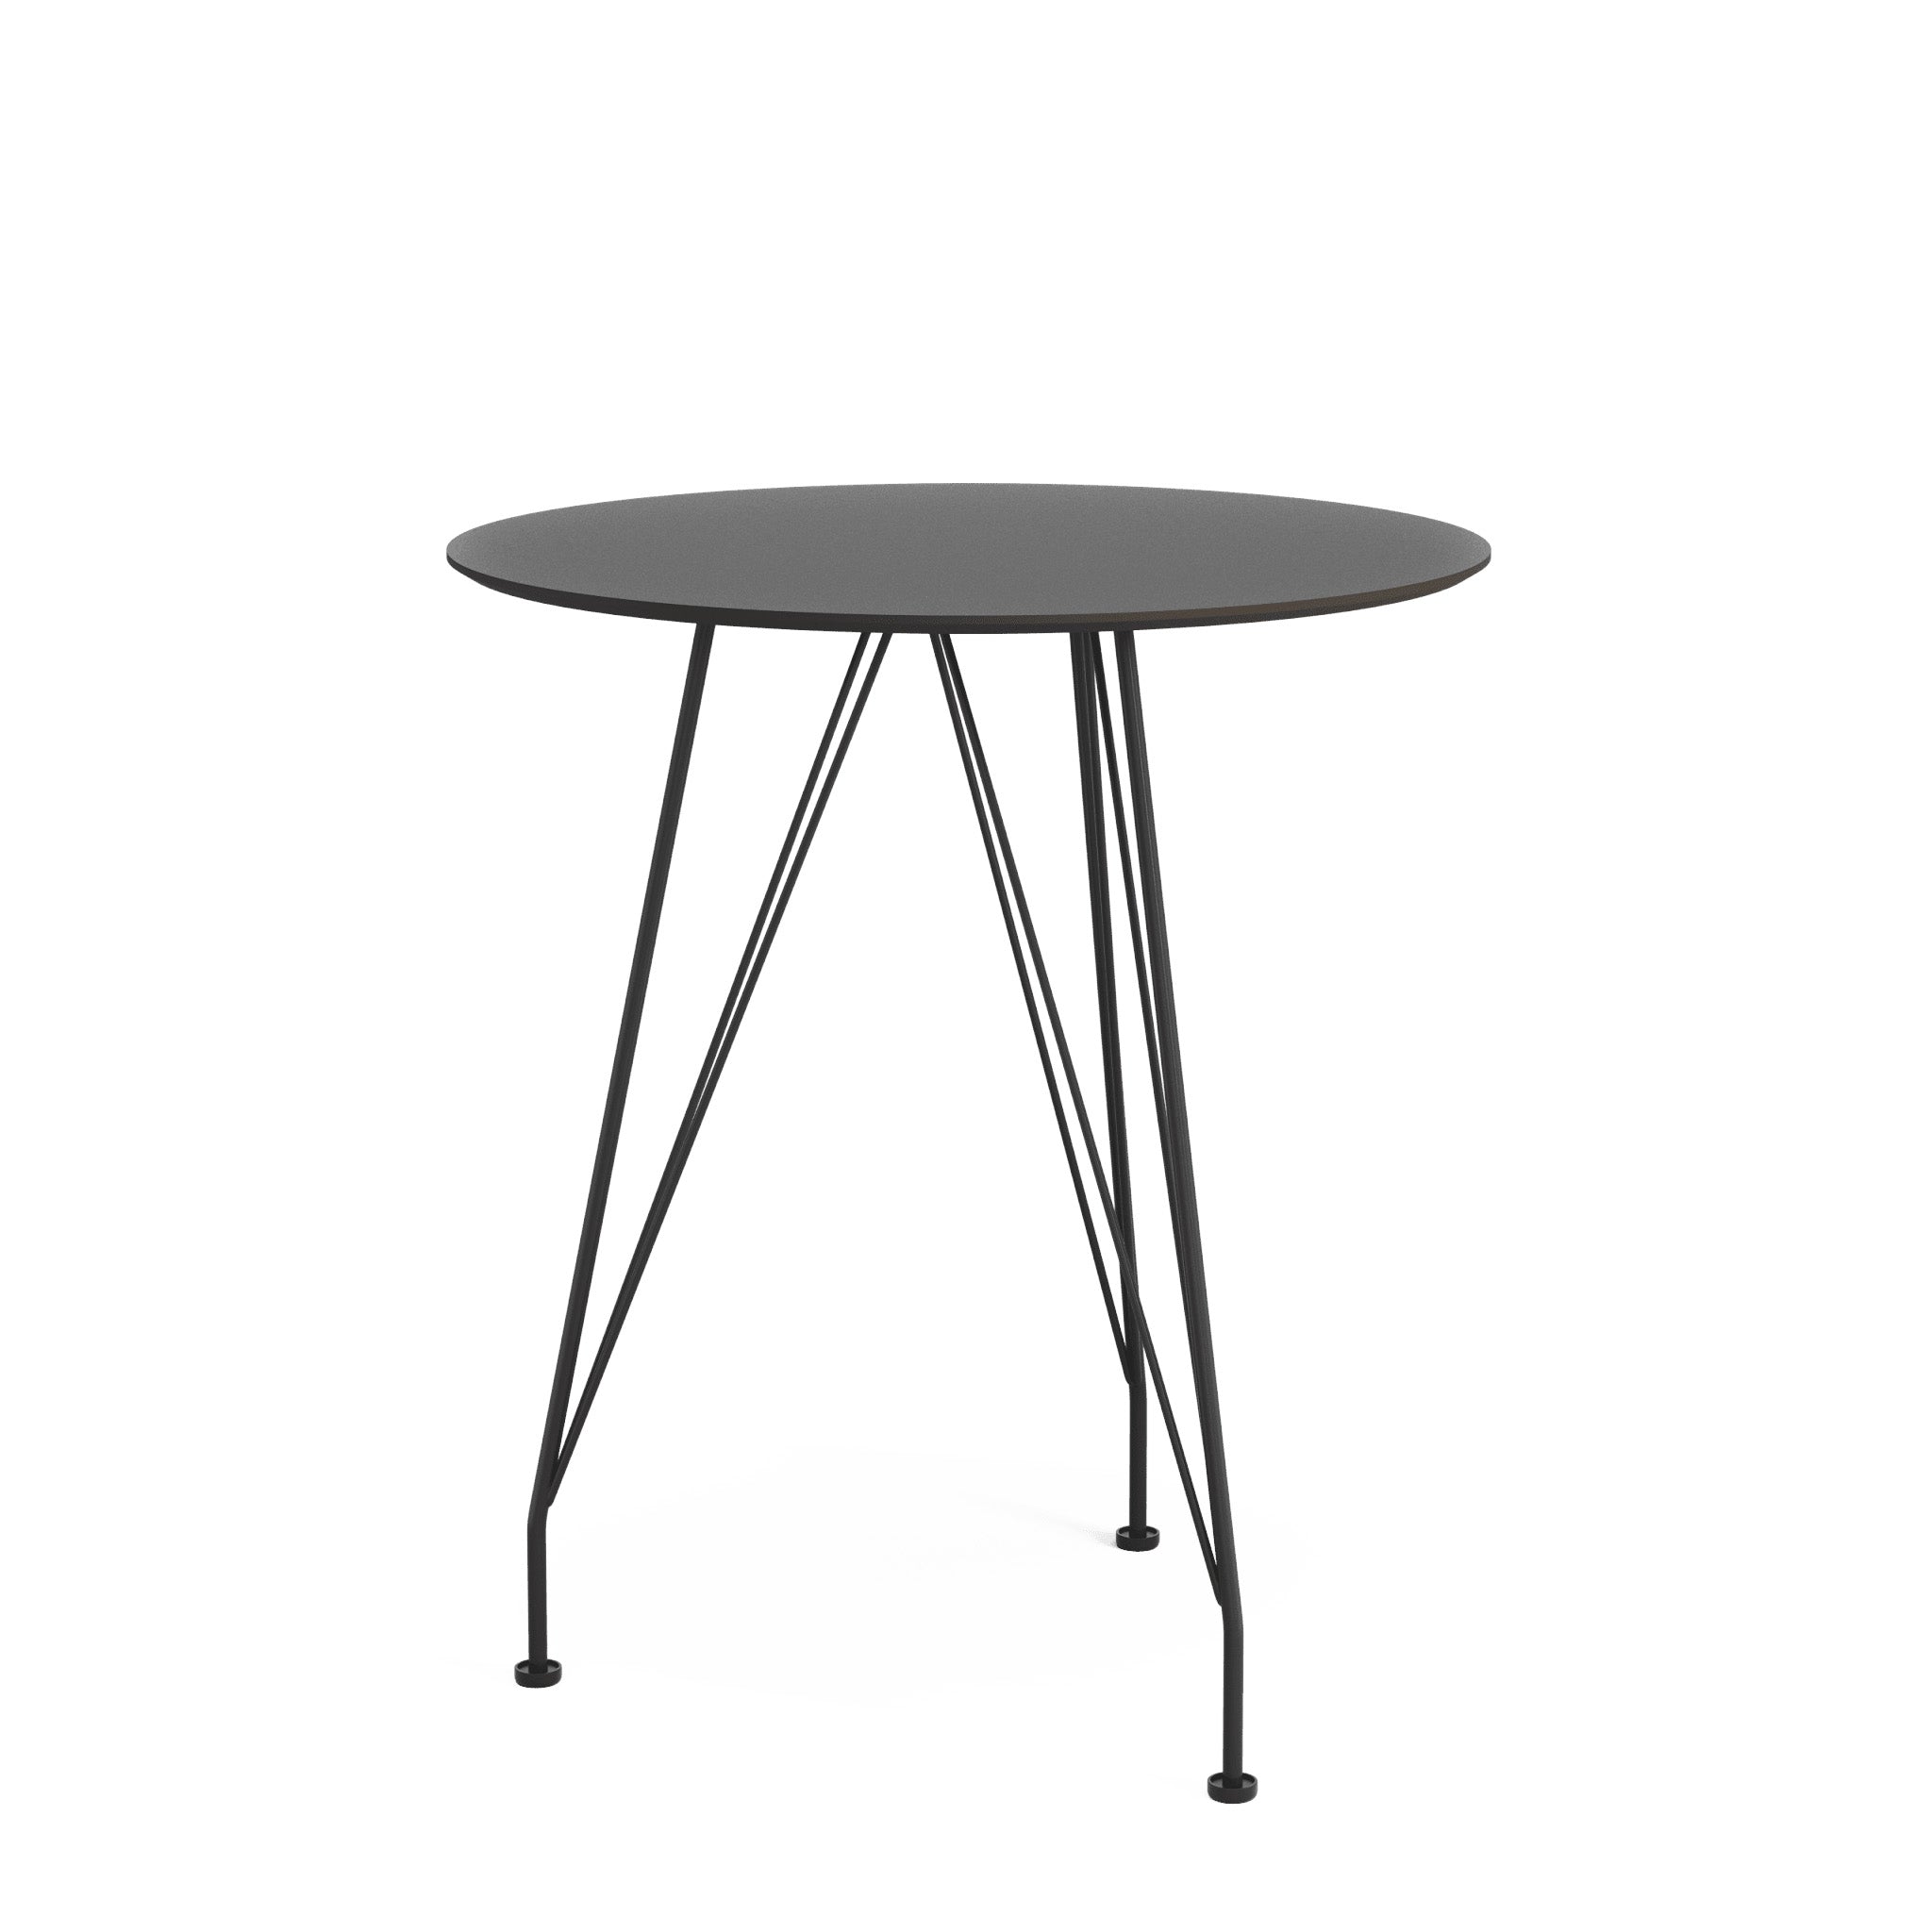 Desirée Table by Swedese